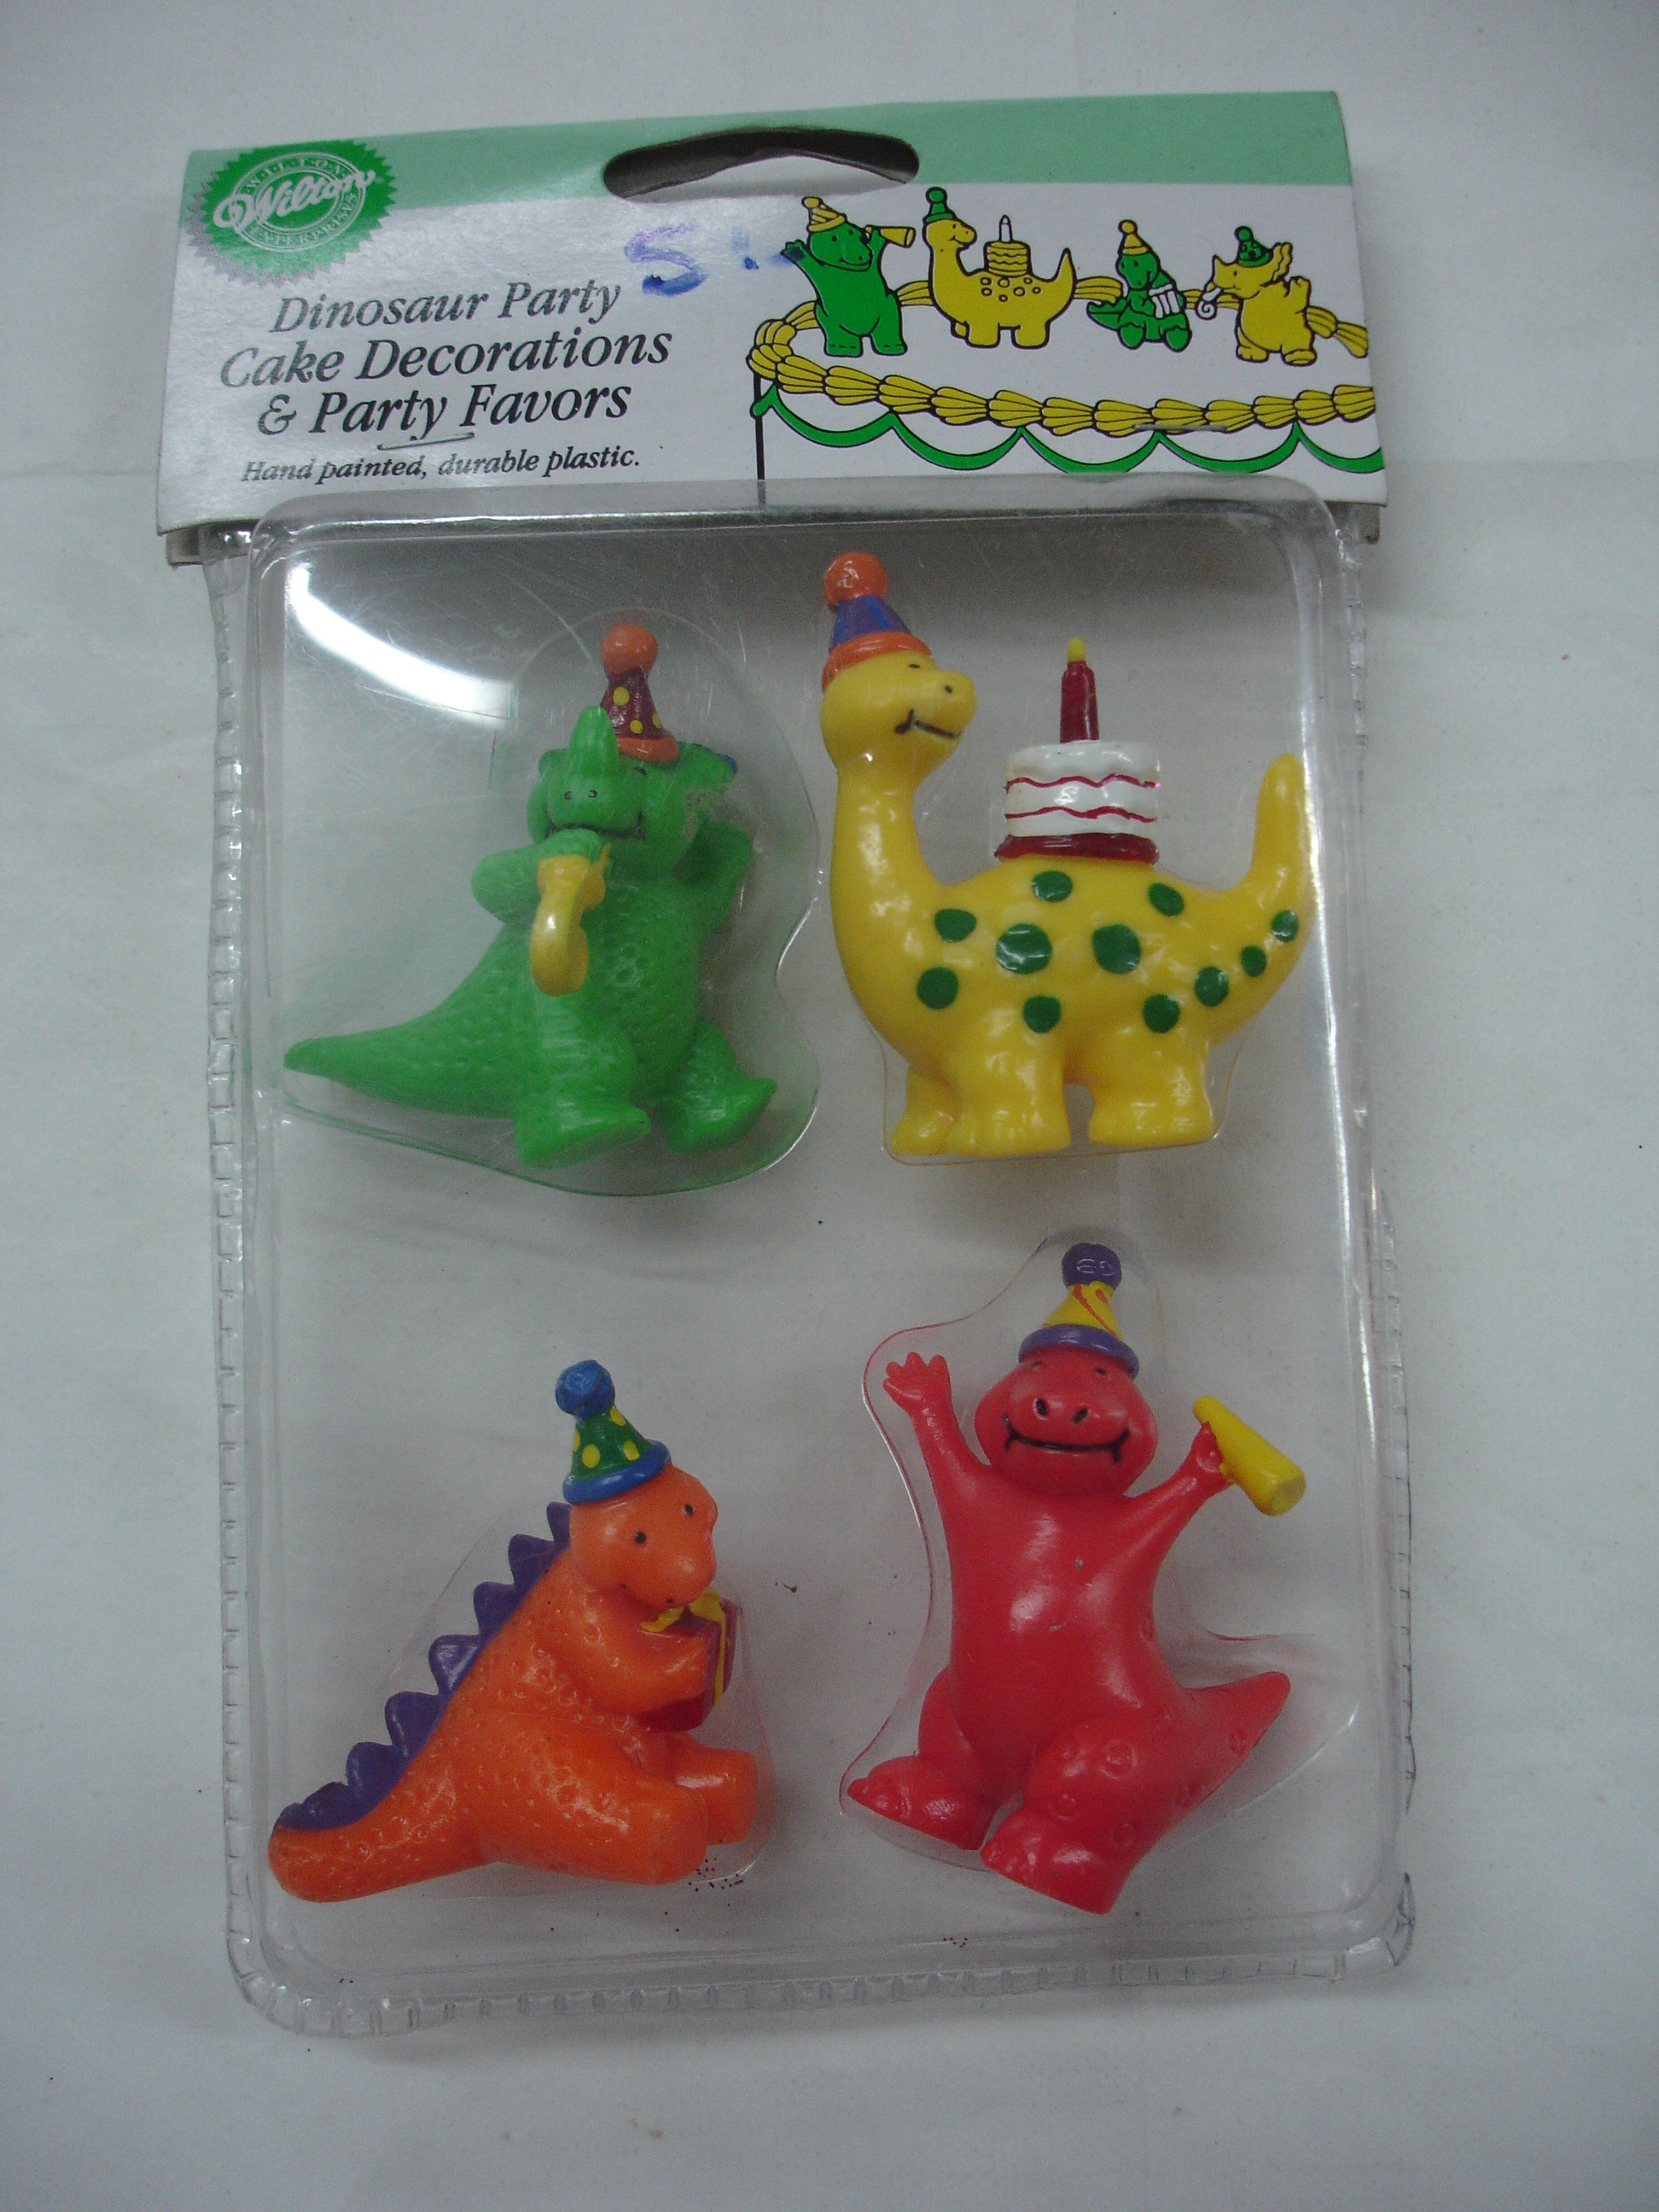 Dinosaur Party Cake Decorations and Party Favor